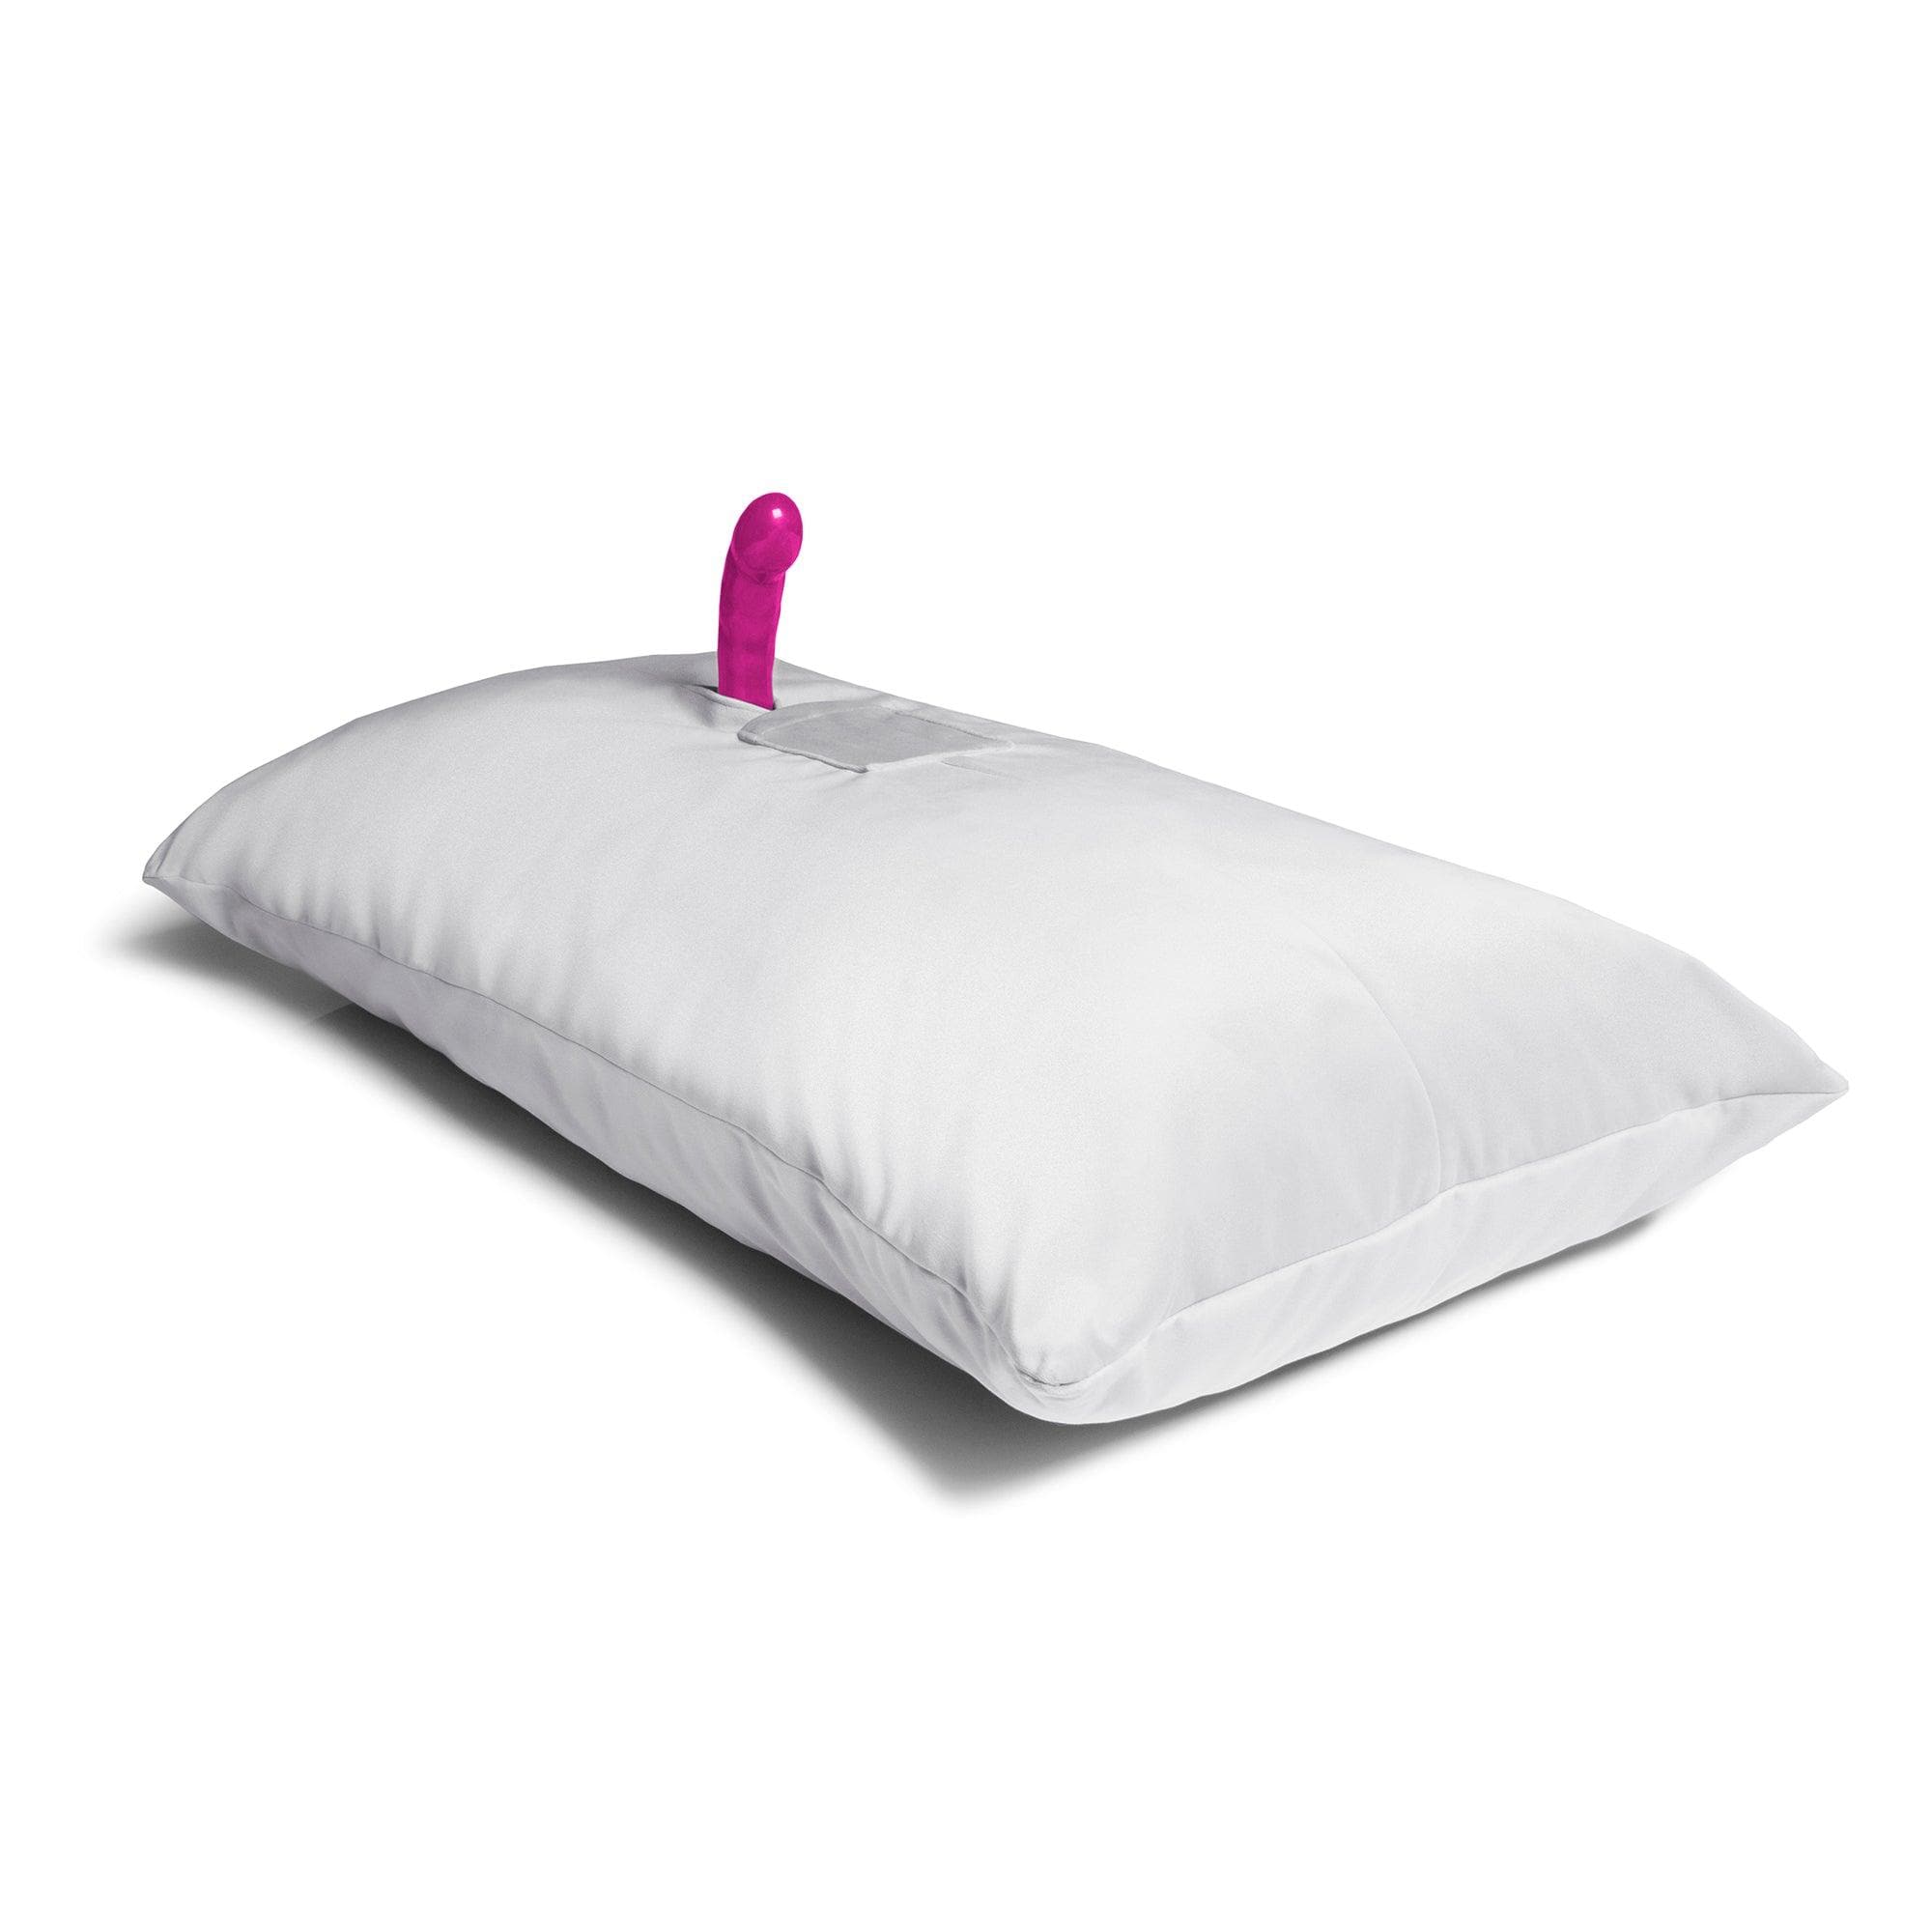 Liberator Humphrey Sex Toy Pillow Couples Sex Position Aid Hands Free Play - Romantic Blessings